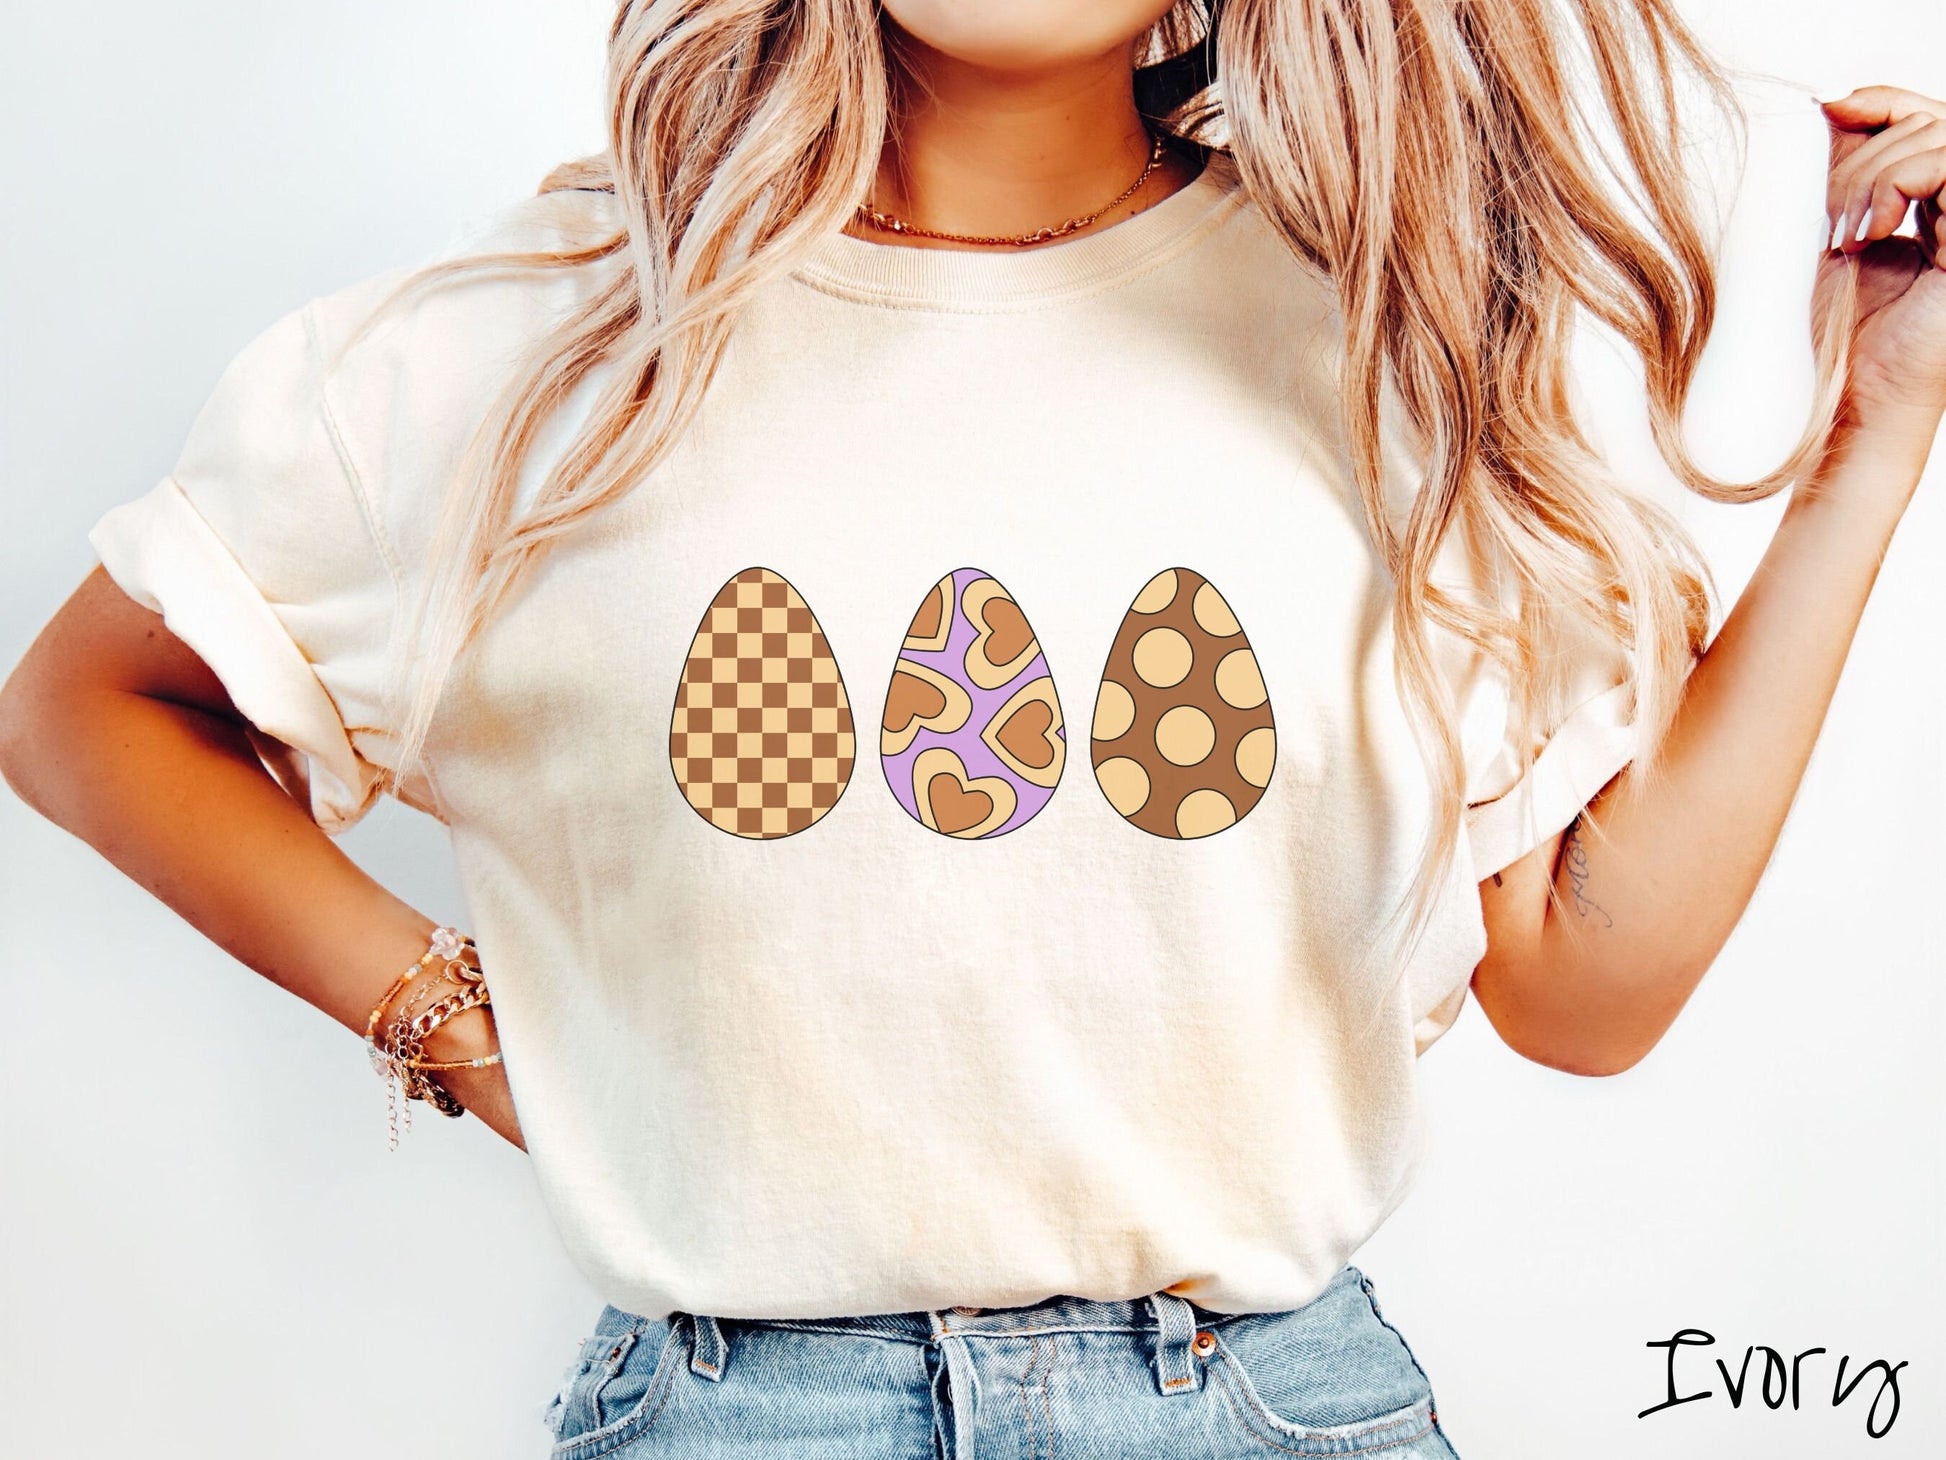 A woman wearing a cute, vintage ivory colored shirt with three Easter eggs. The left egg has a light yellow and brown checkerboard pattern, the middle is purple with light yellow brown hearts, and the right is brown with light yellow circles.